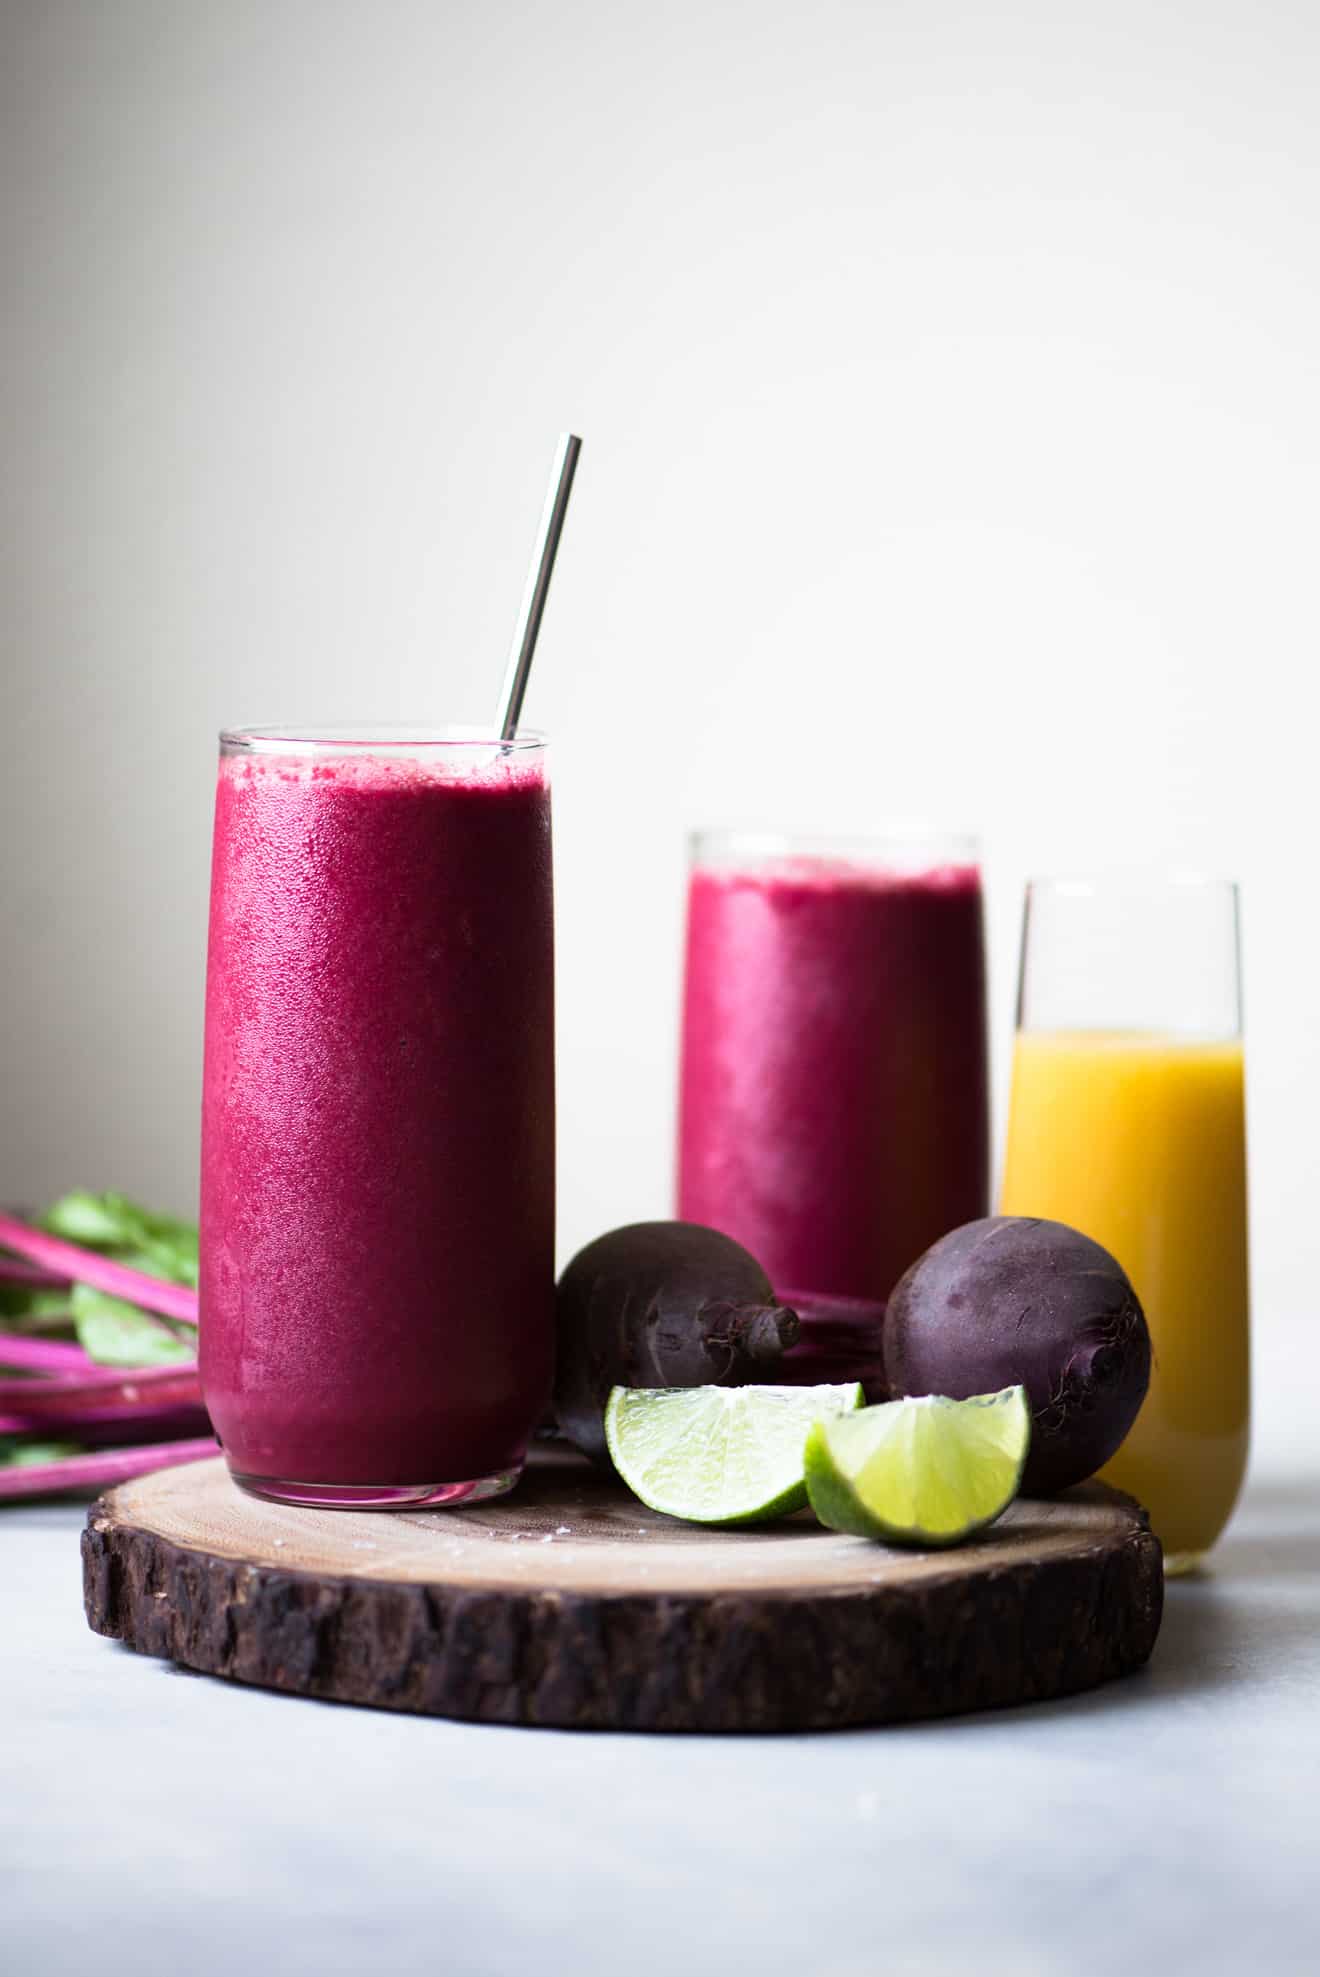 Red Beet Smoothie - a tasty smoothie made with beets and beet greens! Brighten up your day with this extra shot of energy from vegetables!